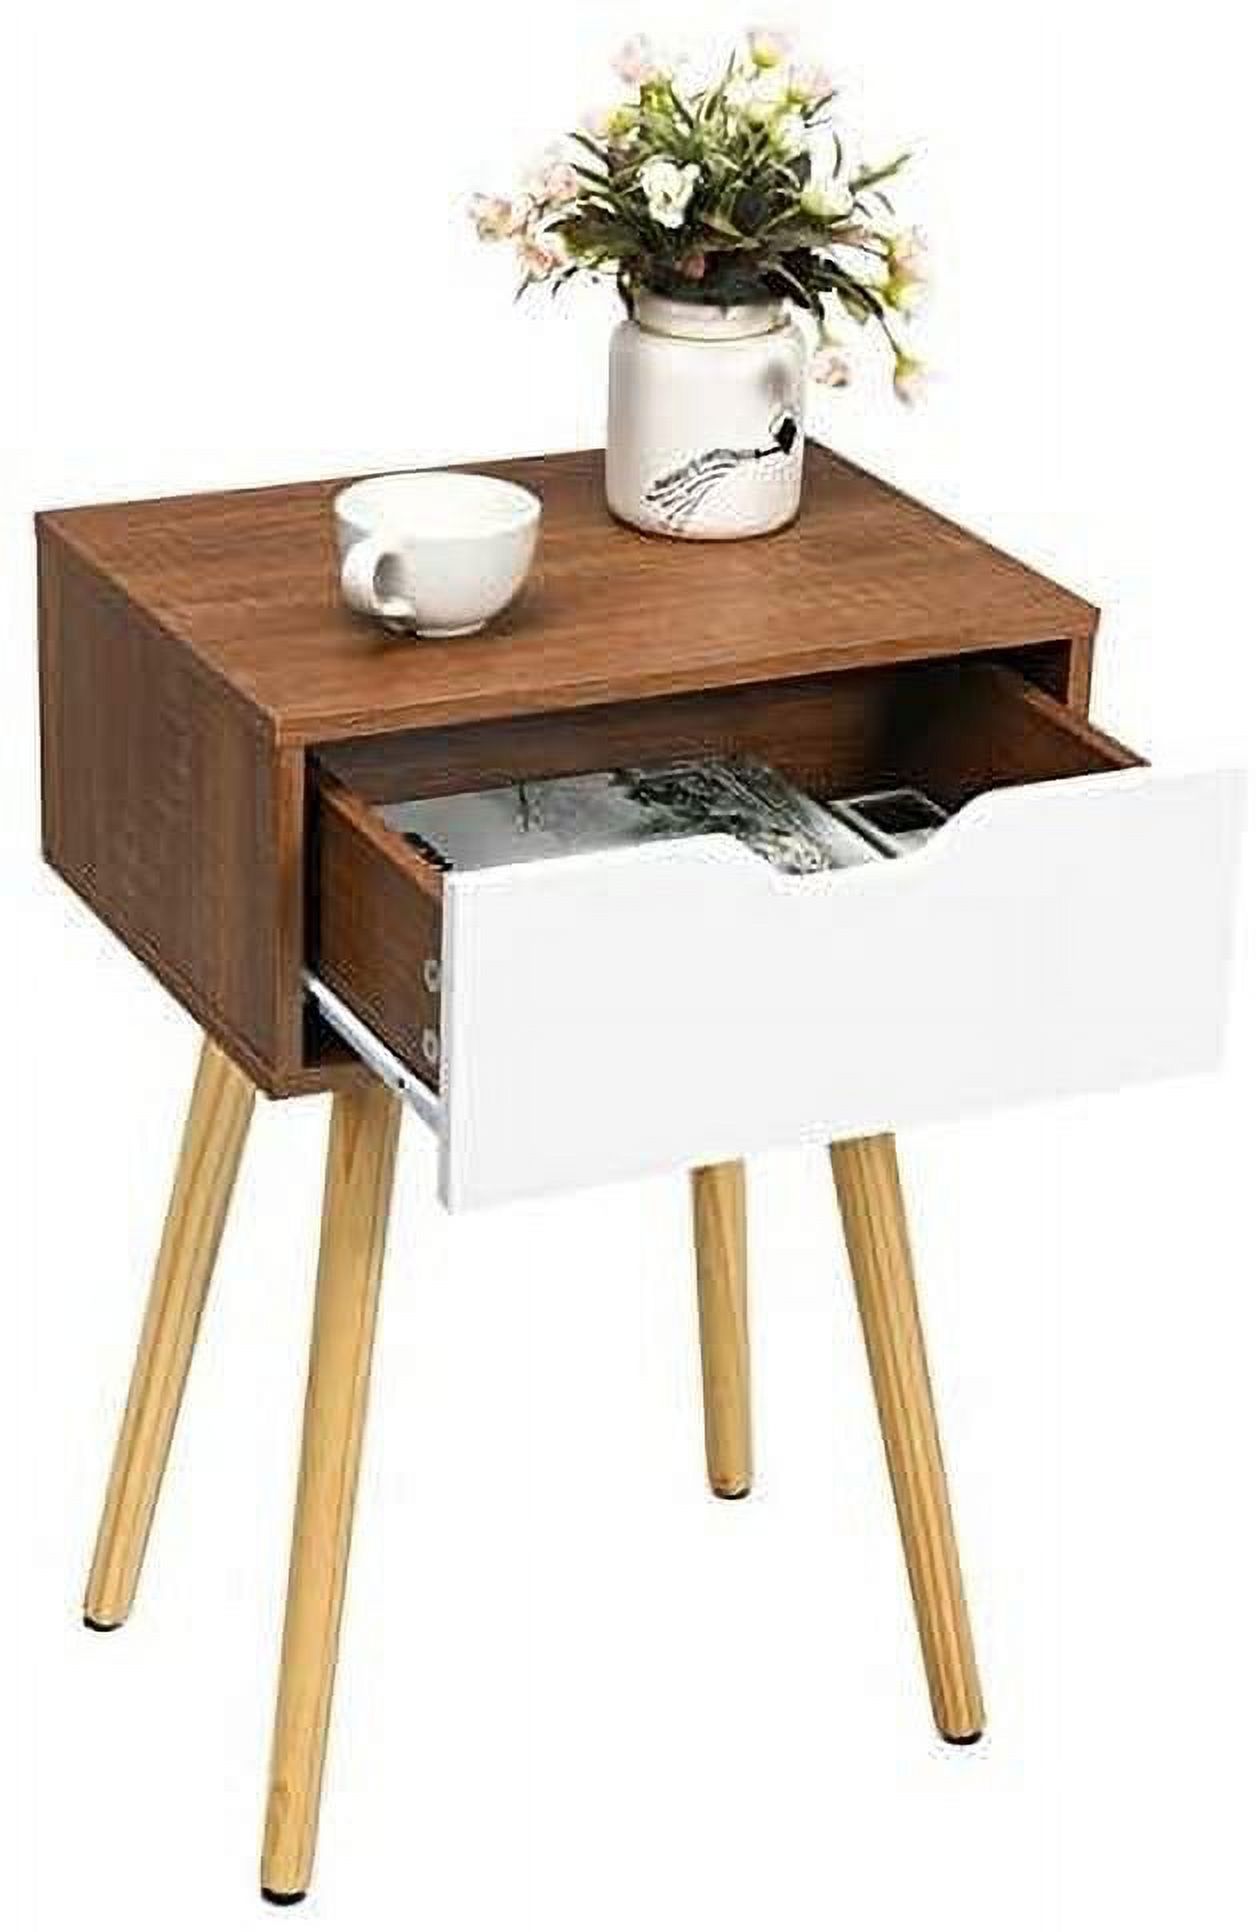 Giantex Mid-Century Nightstand, End Table with Drawer, Wood Bedside Table Side Table for Bedroom - image 1 of 7